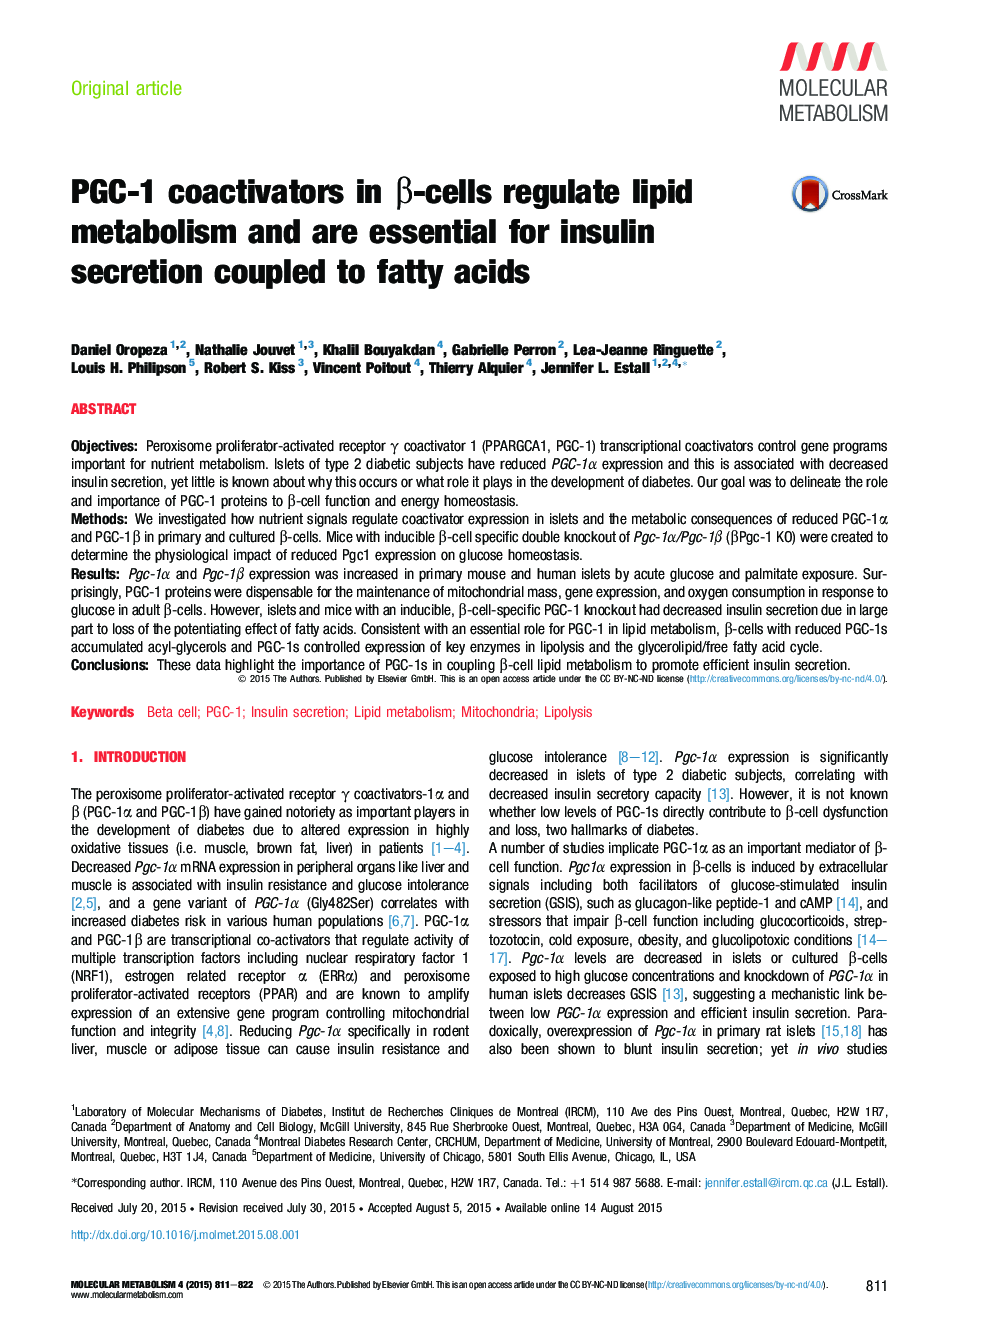 PGC-1 coactivators in β-cells regulate lipid metabolism and are essential for insulin secretion coupled to fatty acids